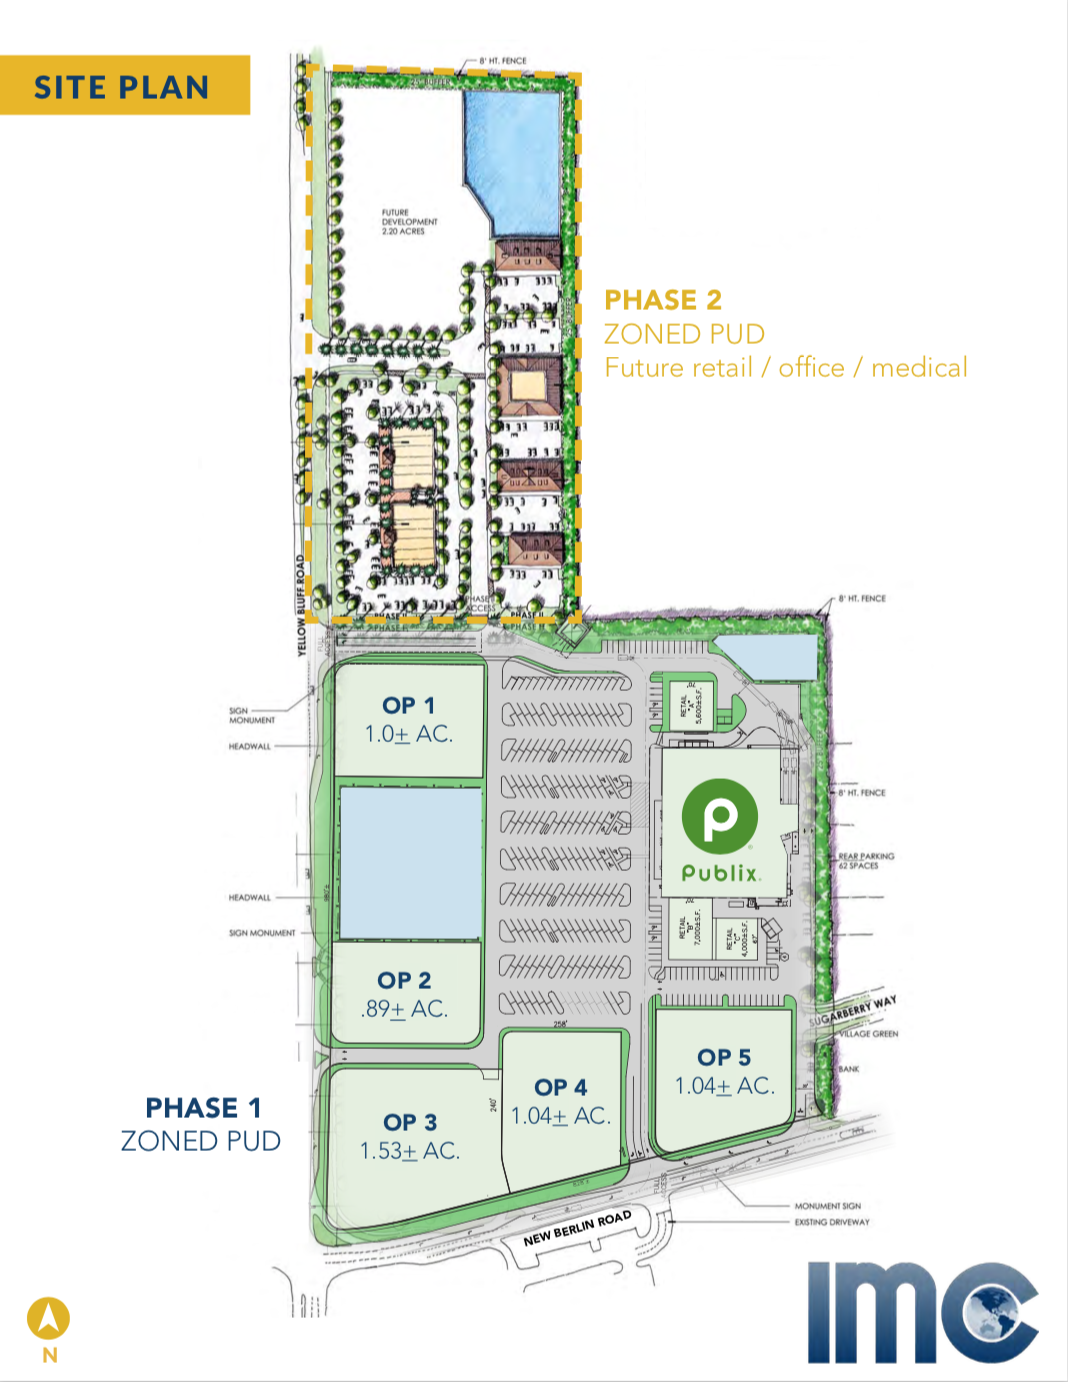 The first 88,000-square-foot phase of Northpoint Village will be anchored by Publix Super Markets Inc. and open in summer 2022. A second phase could add up to 64,000 square feet of retail, medical and office uses.